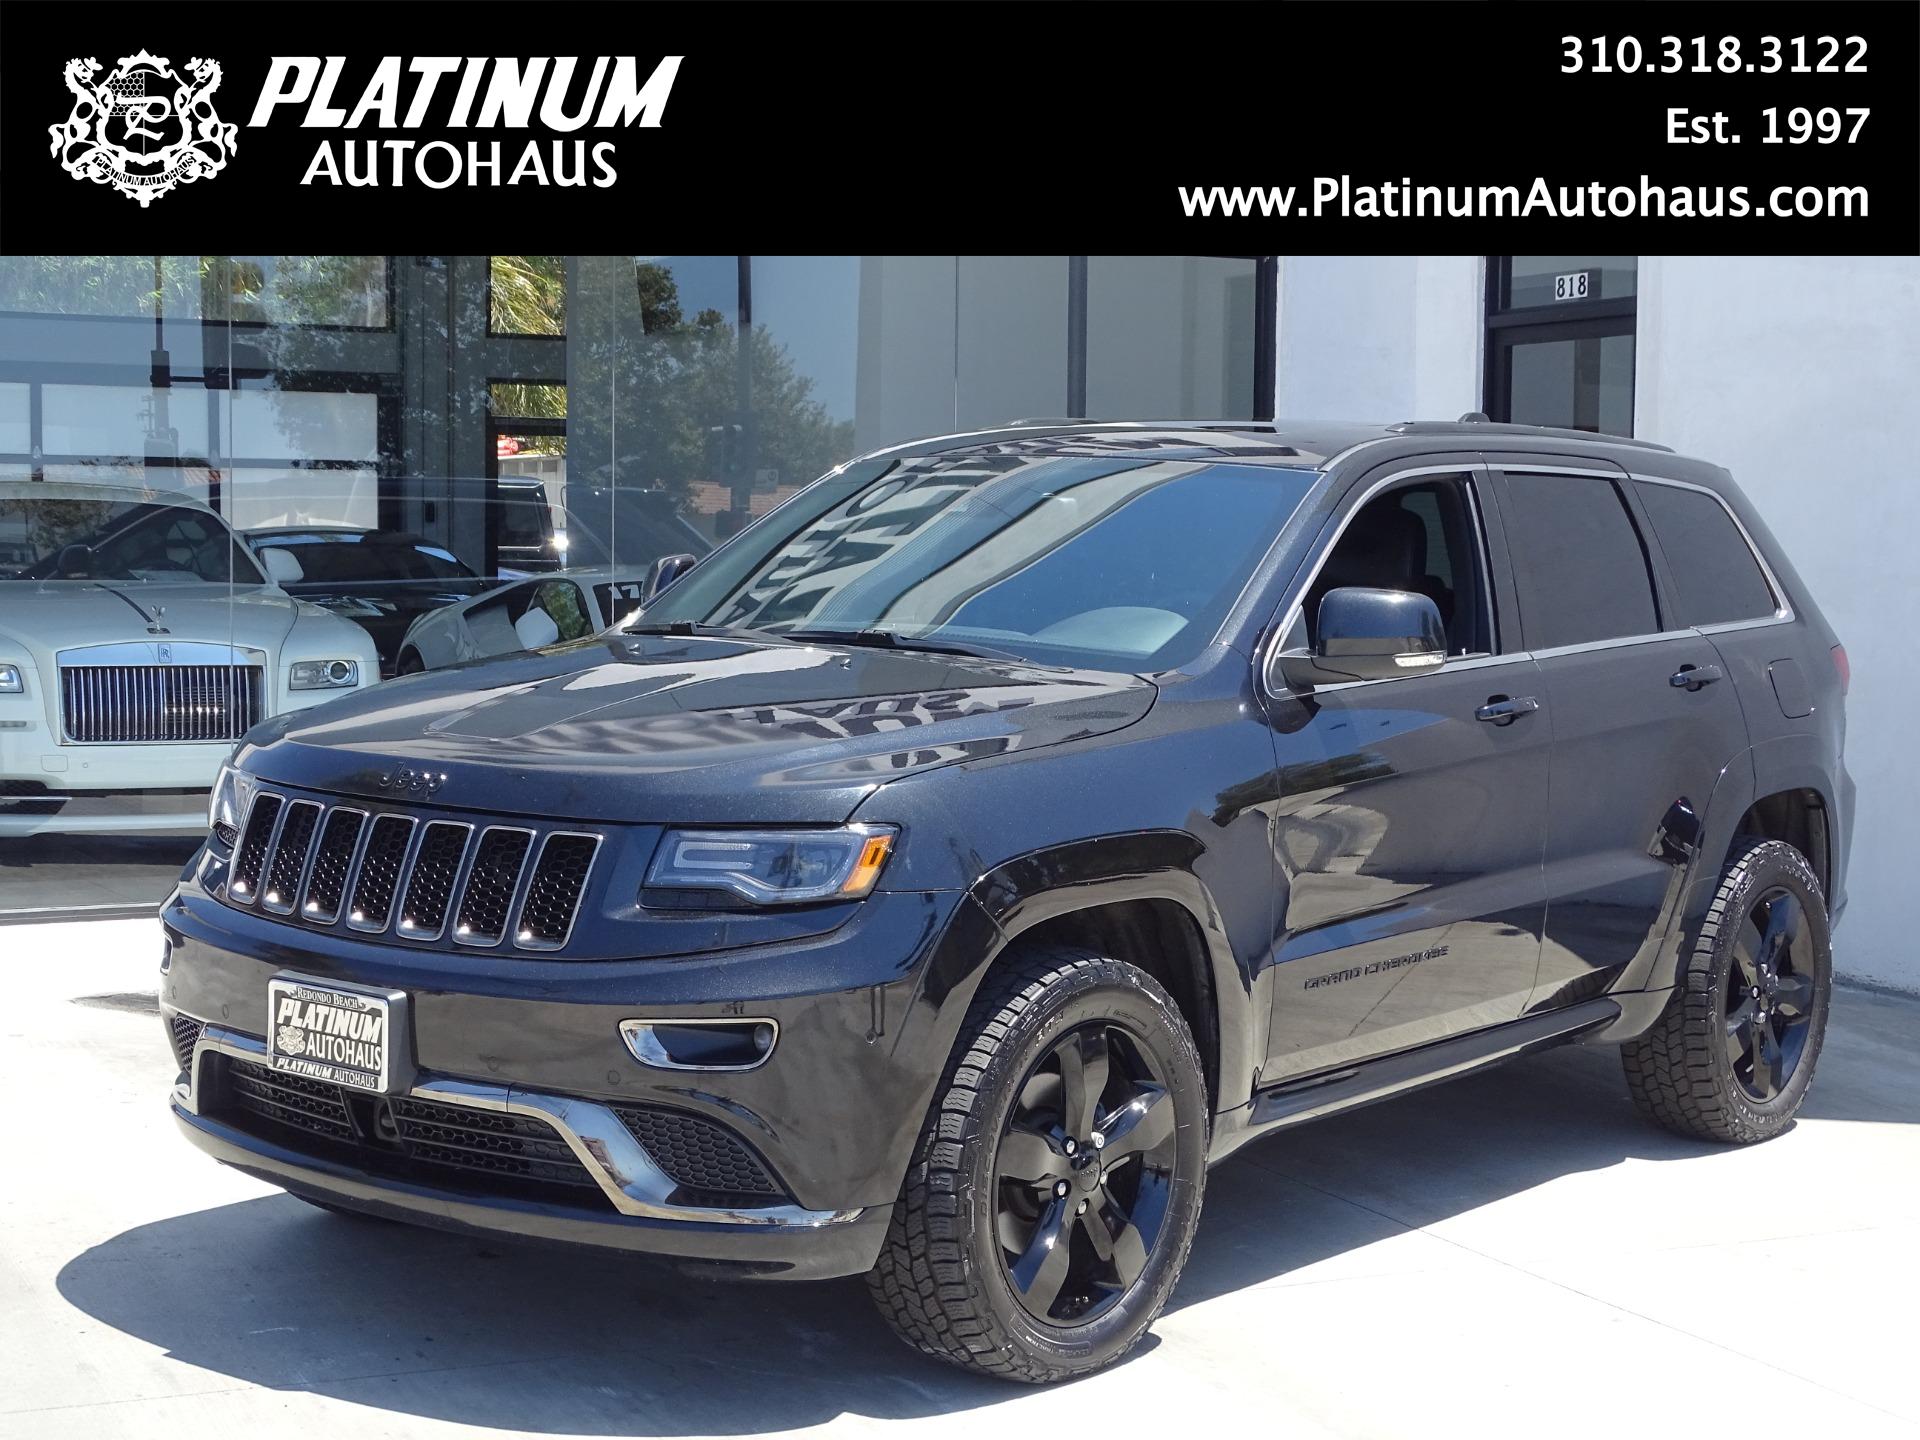 2015 Jeep Grand Cherokee High Altitude Stock 6125a For